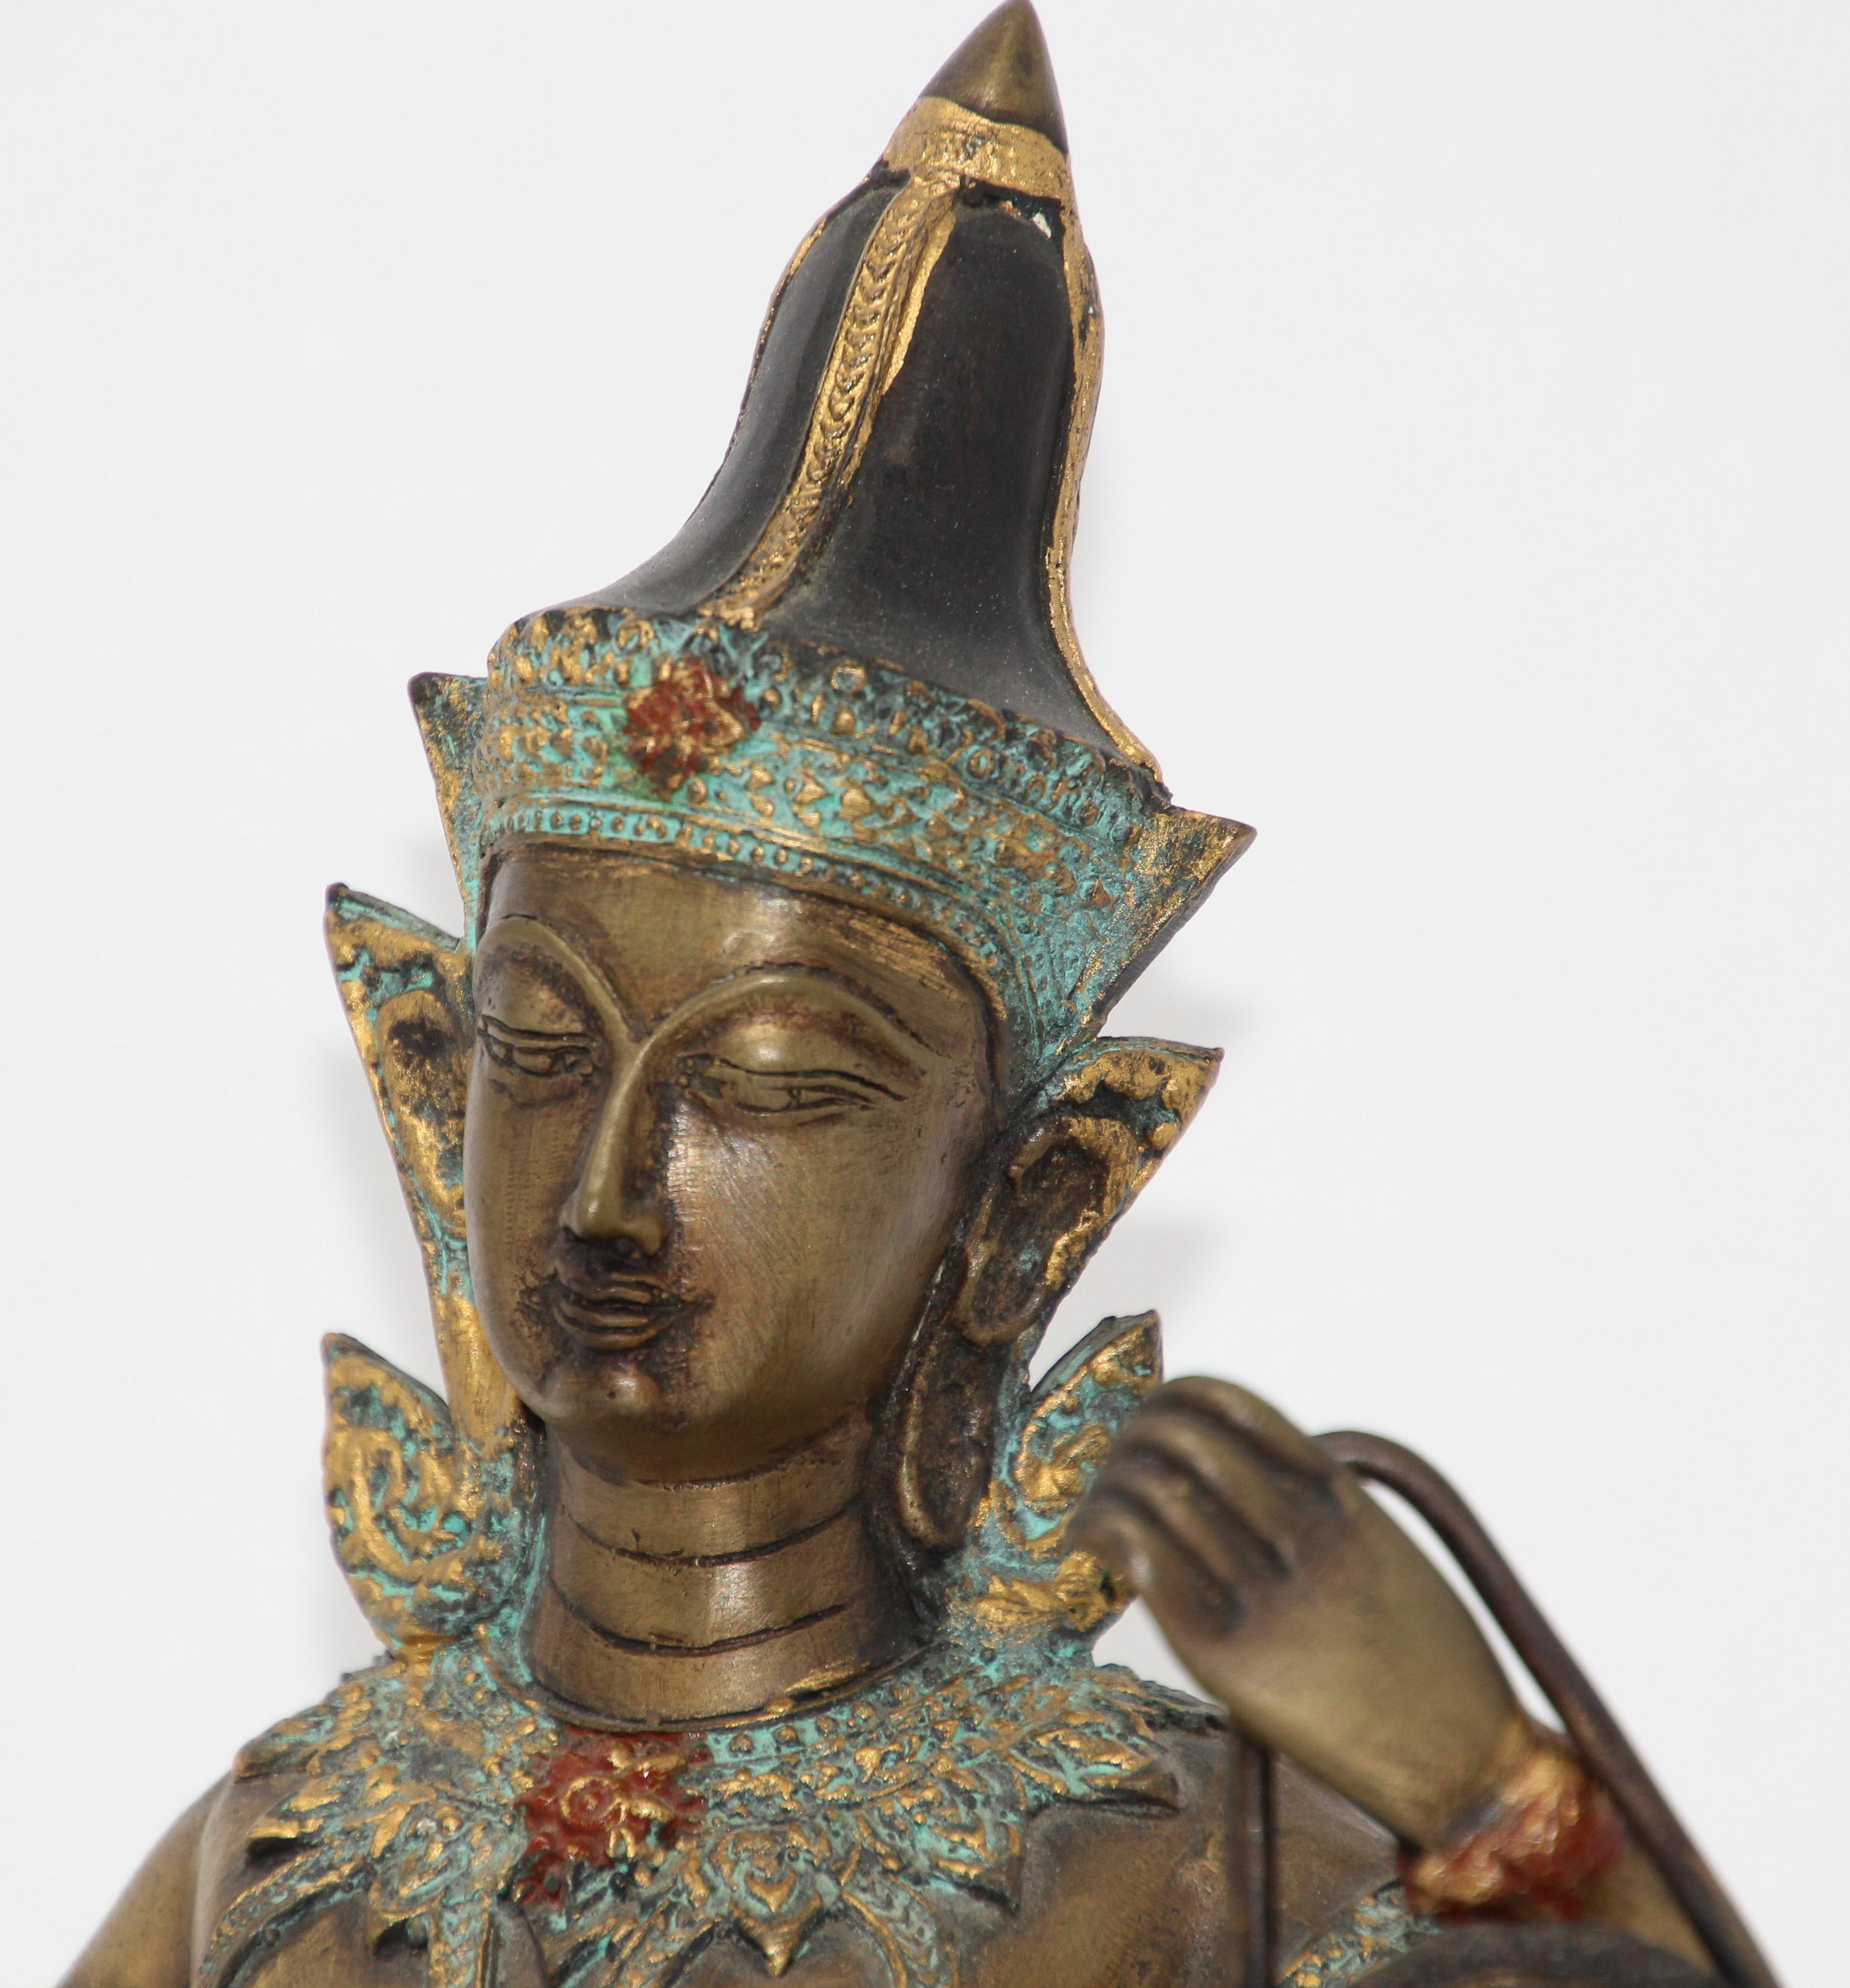 Asian gilt cold painted bronze statue of Prince Pra Apai Manee playing a traditional Asian instrument.
Intricate cast bronze Angel Buddha figure with gold leaf detailing wearing the ceremonial costume in green jade and jewelry are adorned with gold